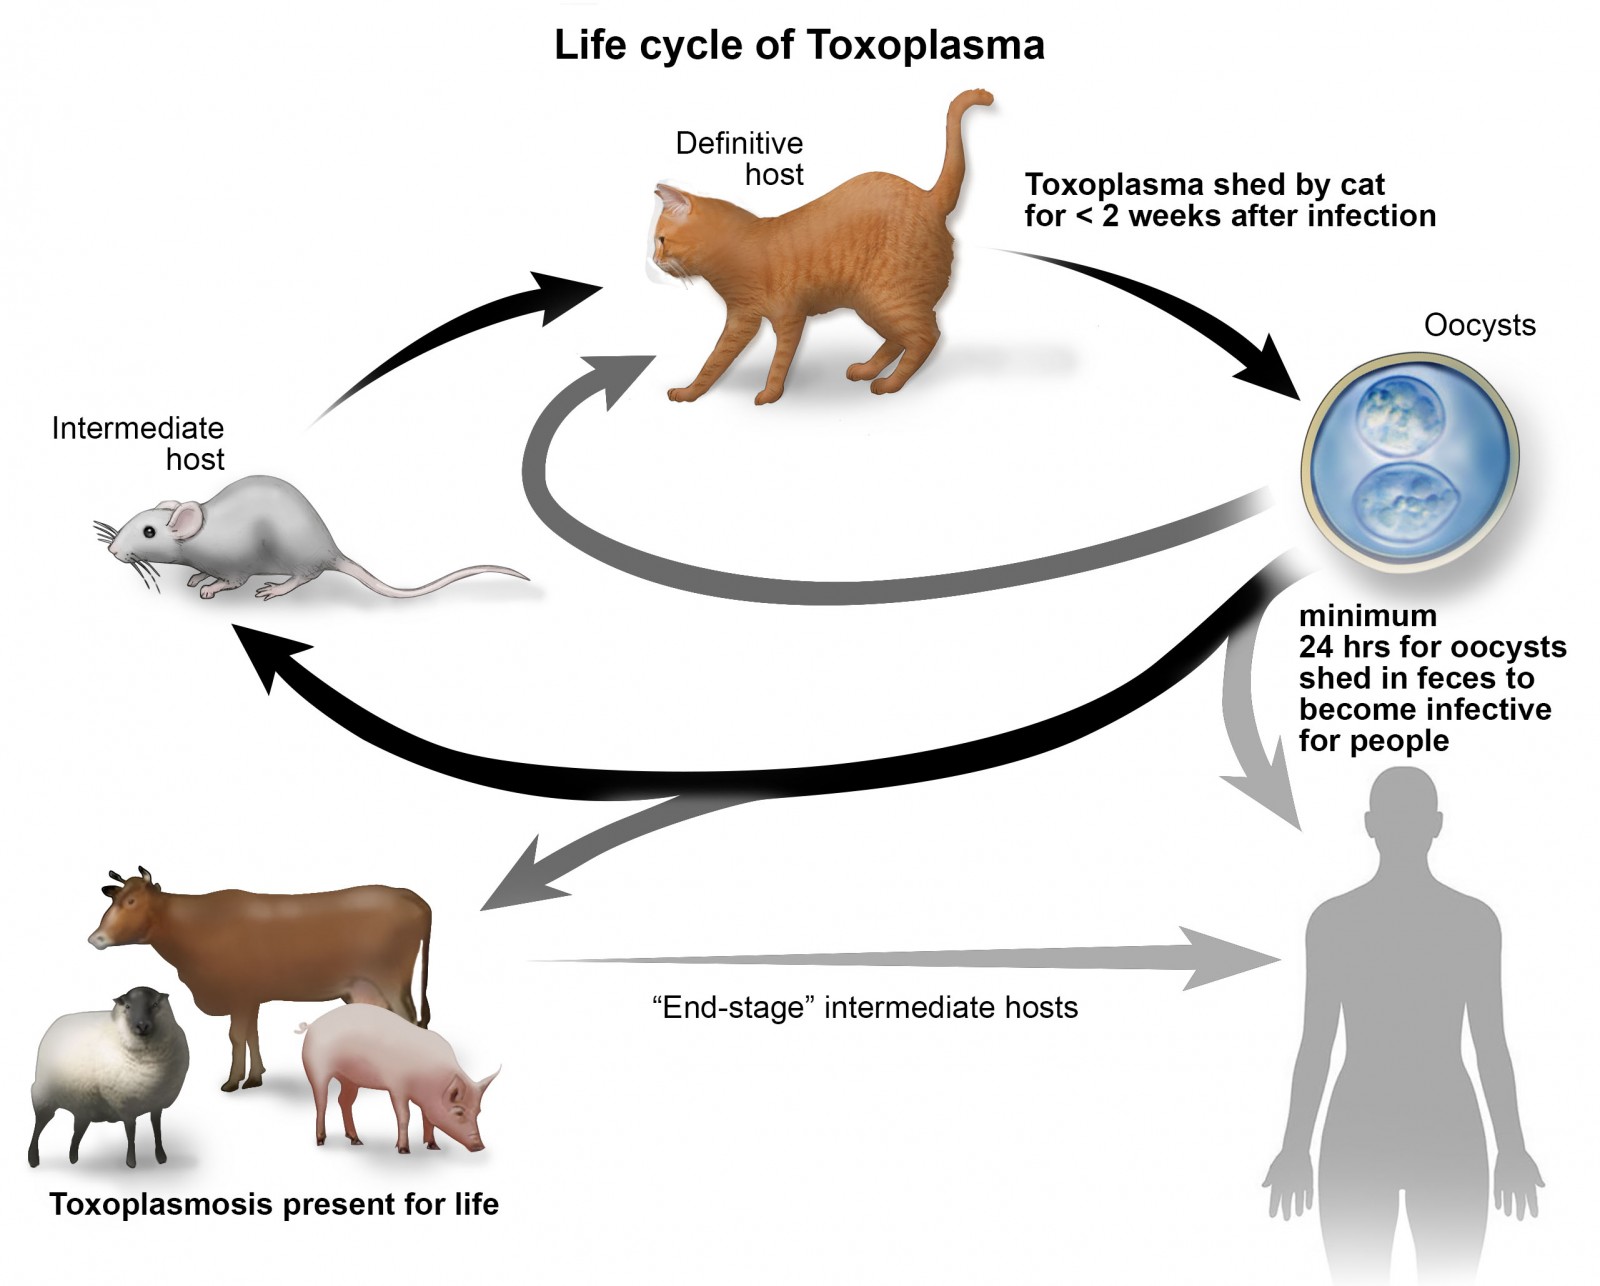 Toxoplasmosis is a disease that results from infection with the Toxoplasma gondii parasite, one of the world's most common parasites.